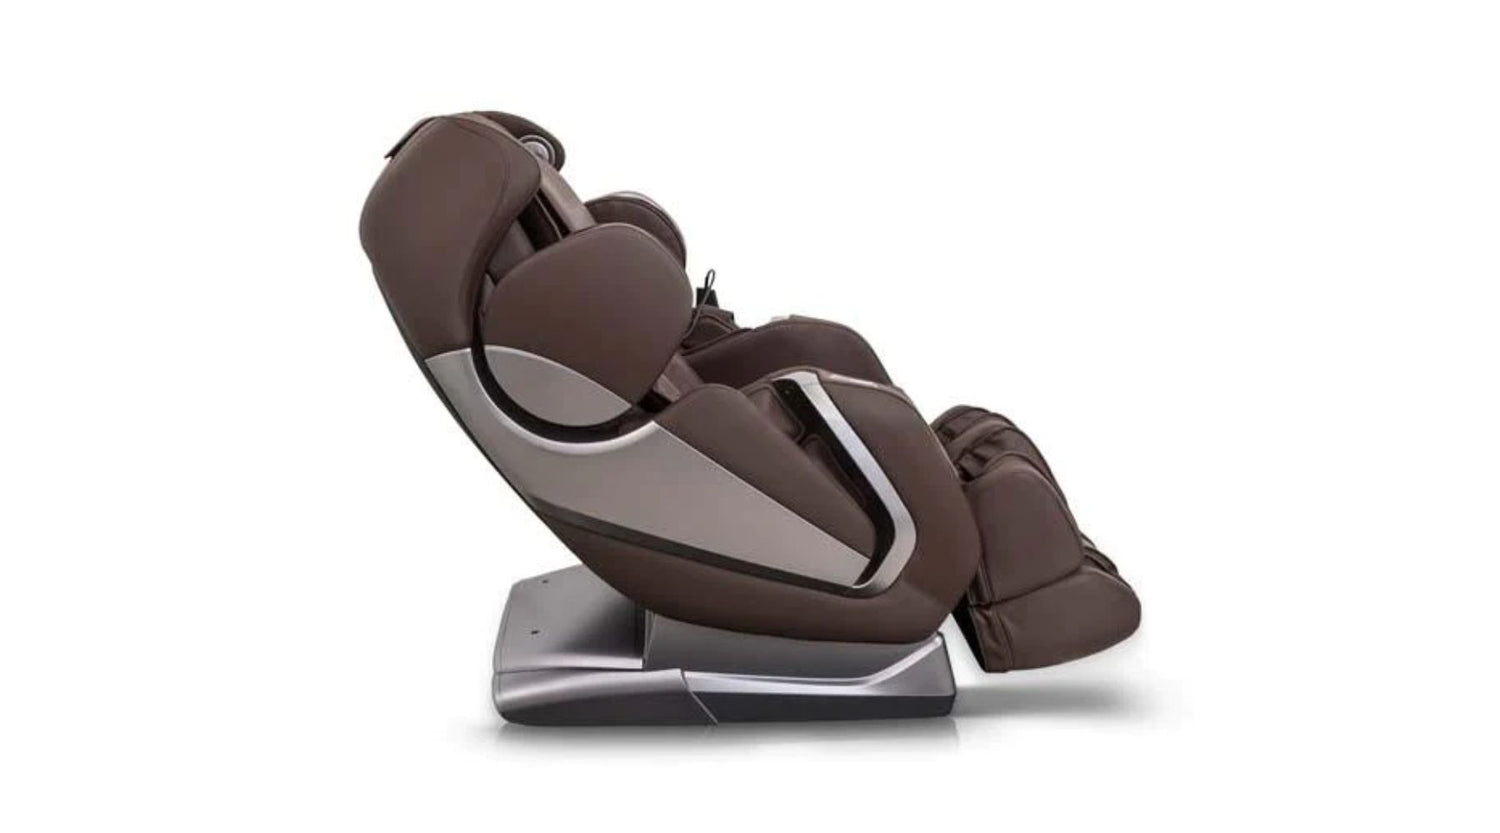 Why You Need a Massage Chair in Your Home Office